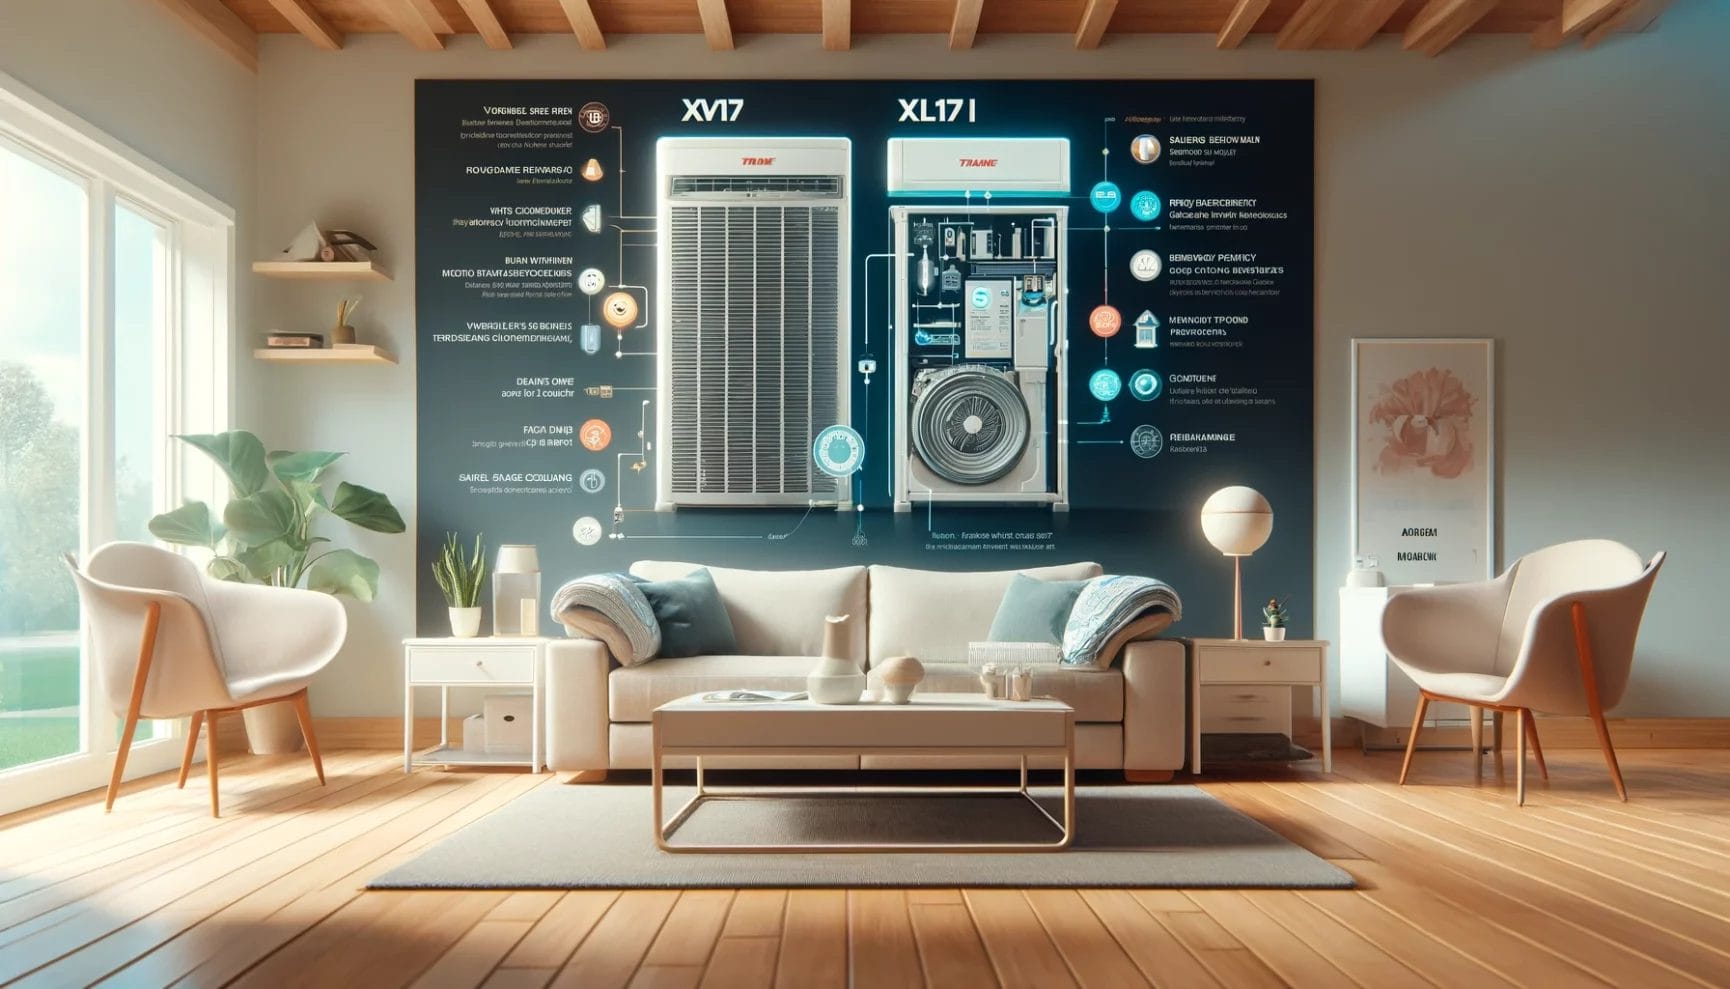 A modern living room with an augmented reality display showcasing technical specifications of household appliances.